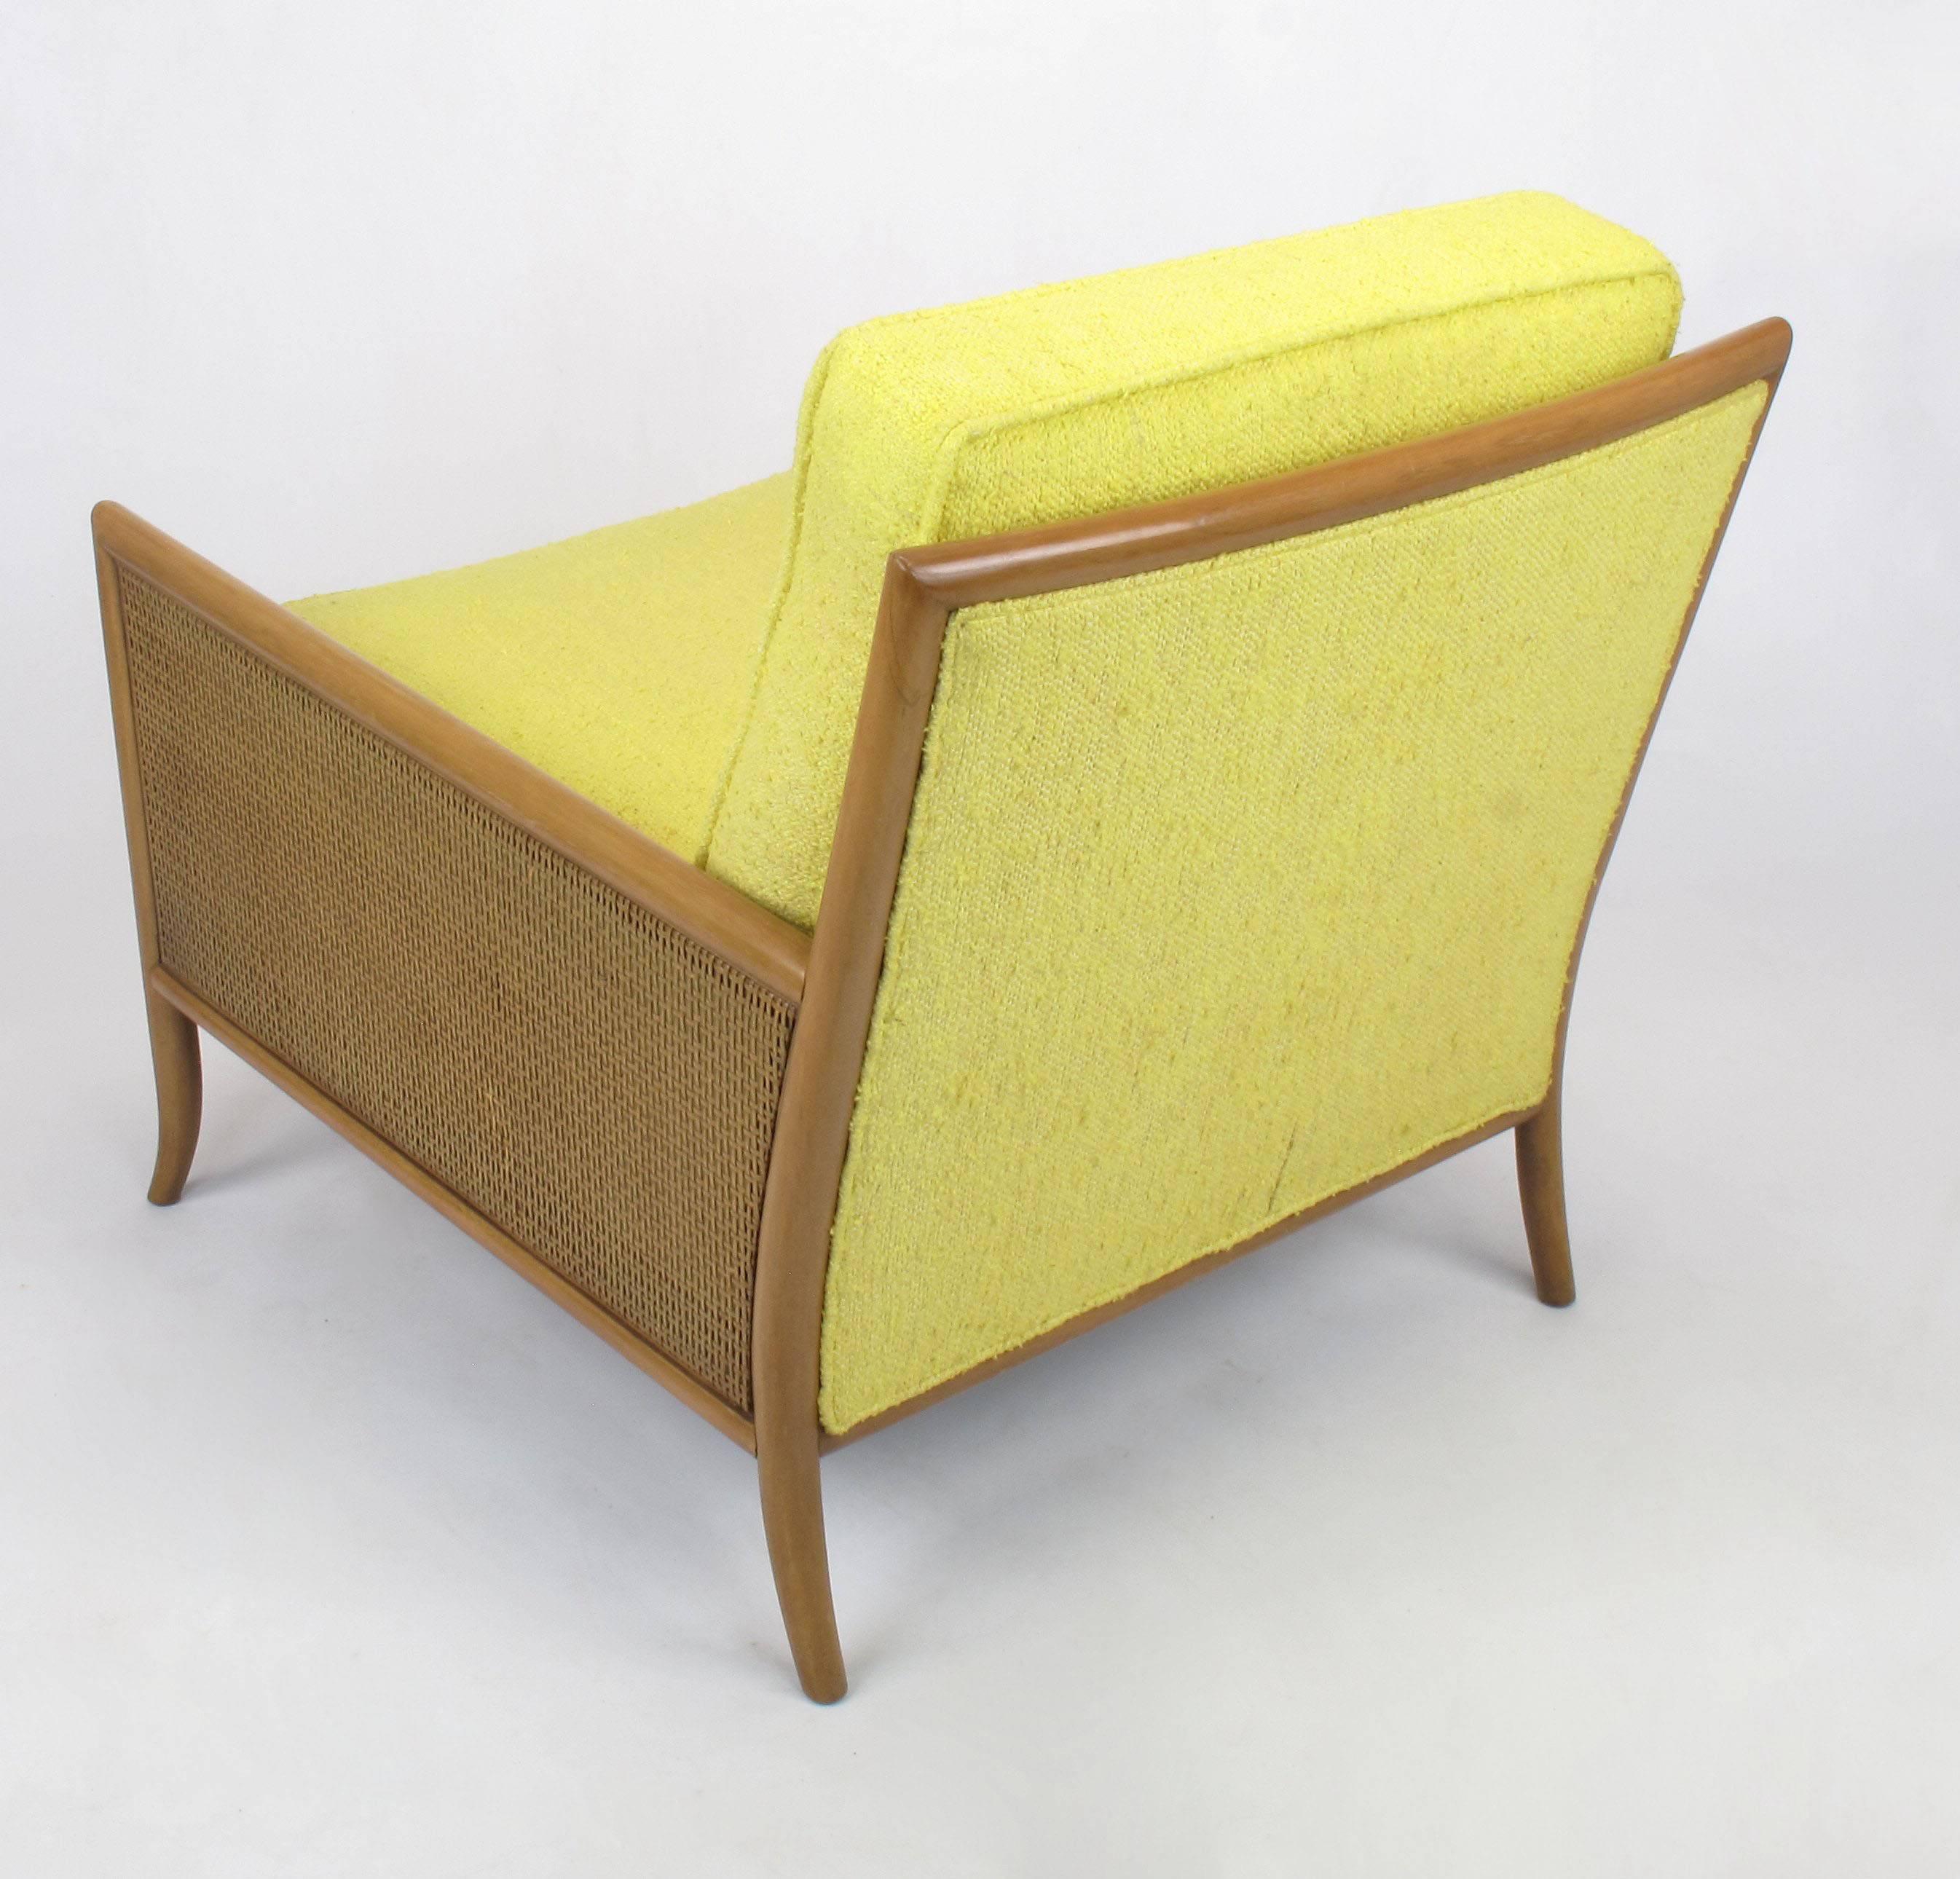 Bleached Pair of Walnut & Yellow Haitian Cotton Lounge Chairs after TH. Robsjohn-Gibbings